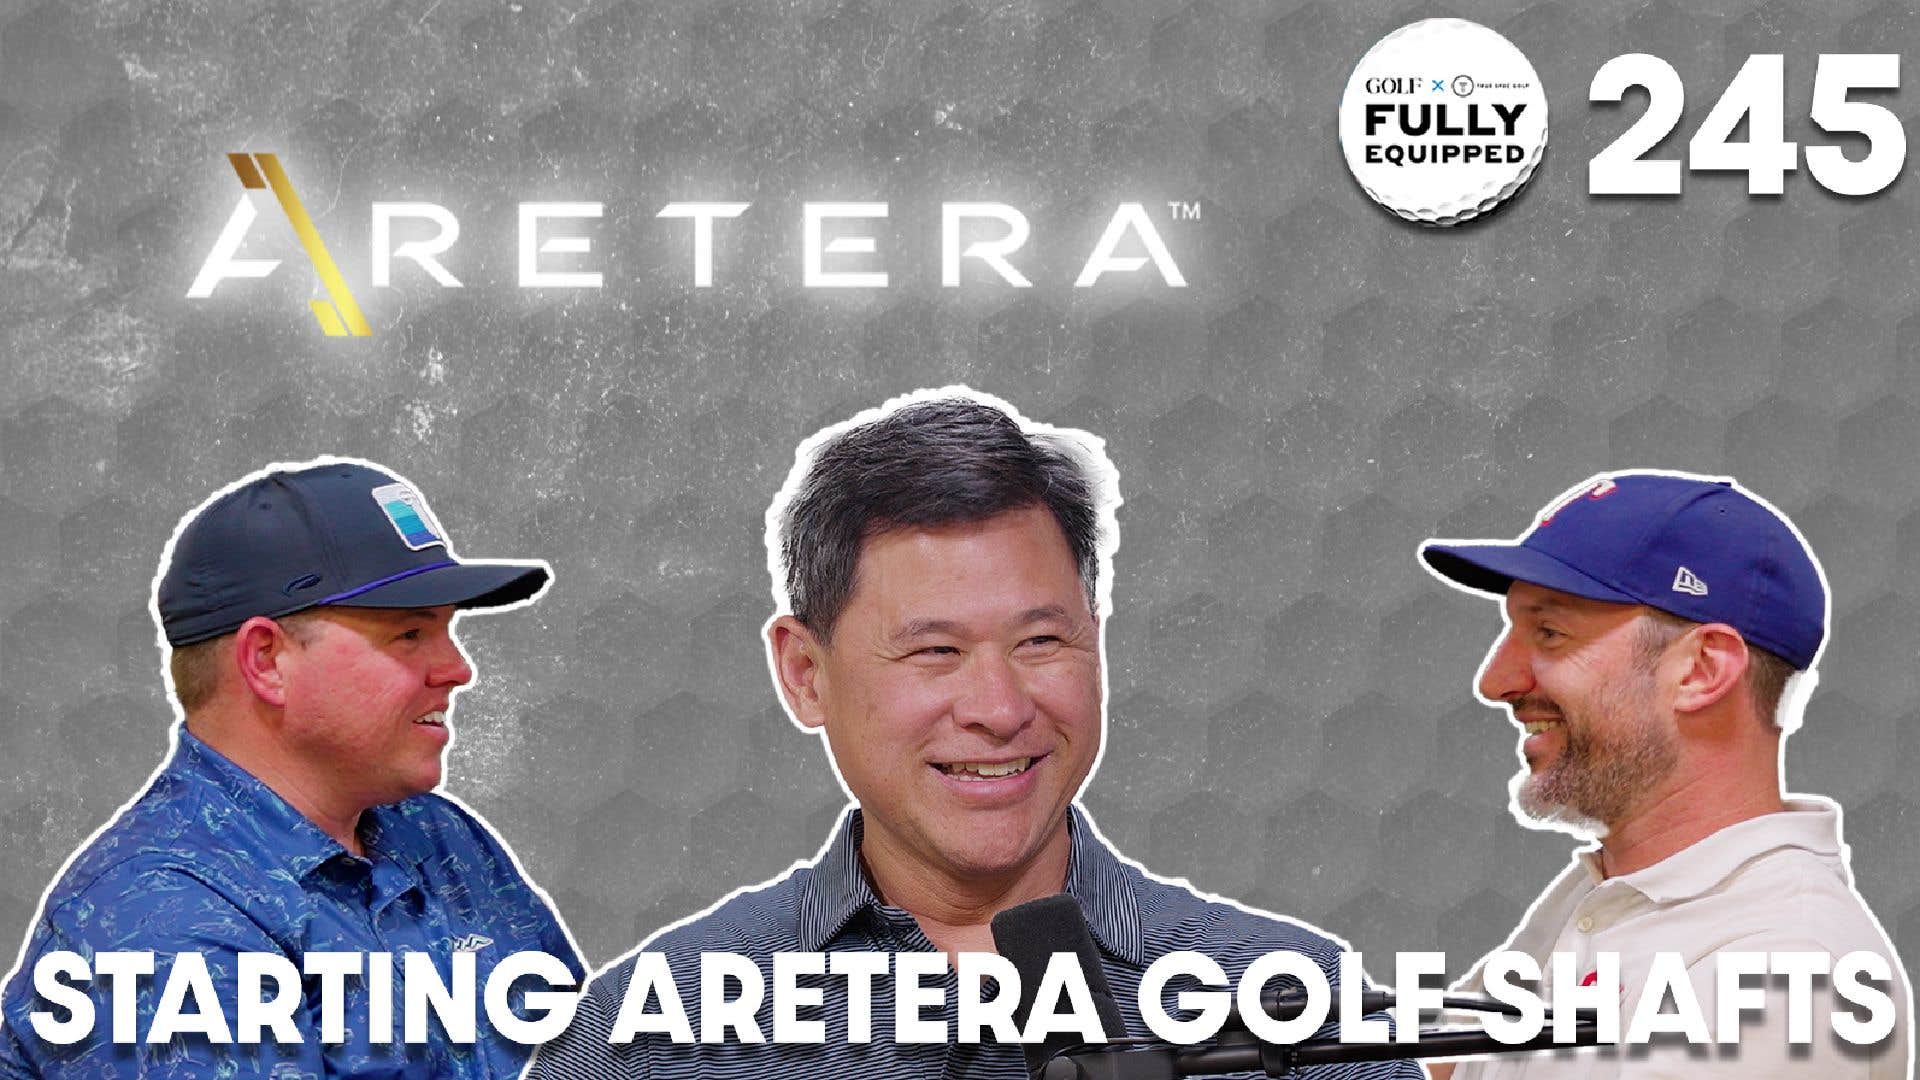 What differentiates Aretera's new shaft line | Fully Equipped